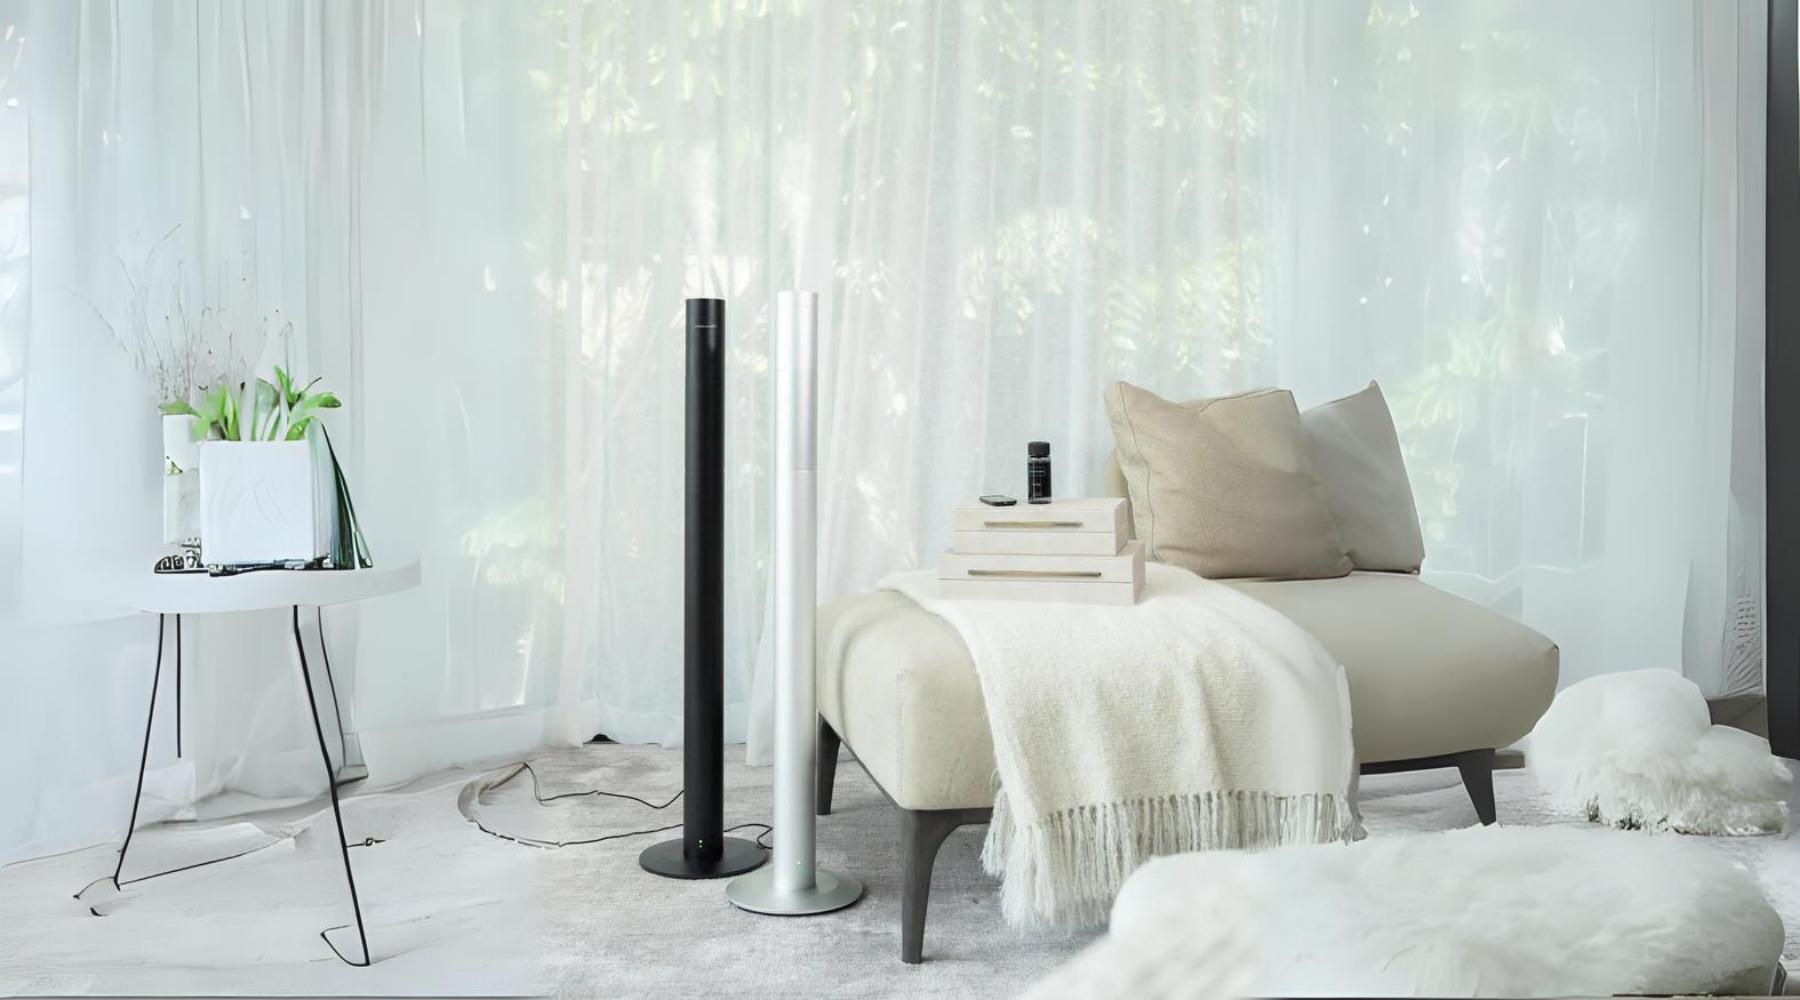 A lifestyle image of two of Aroma360's Michelangelo360 Scent Diffusers in Midnight Black and Metallic Silver next to Aroma360's Pro-Pod Fragrance Oil